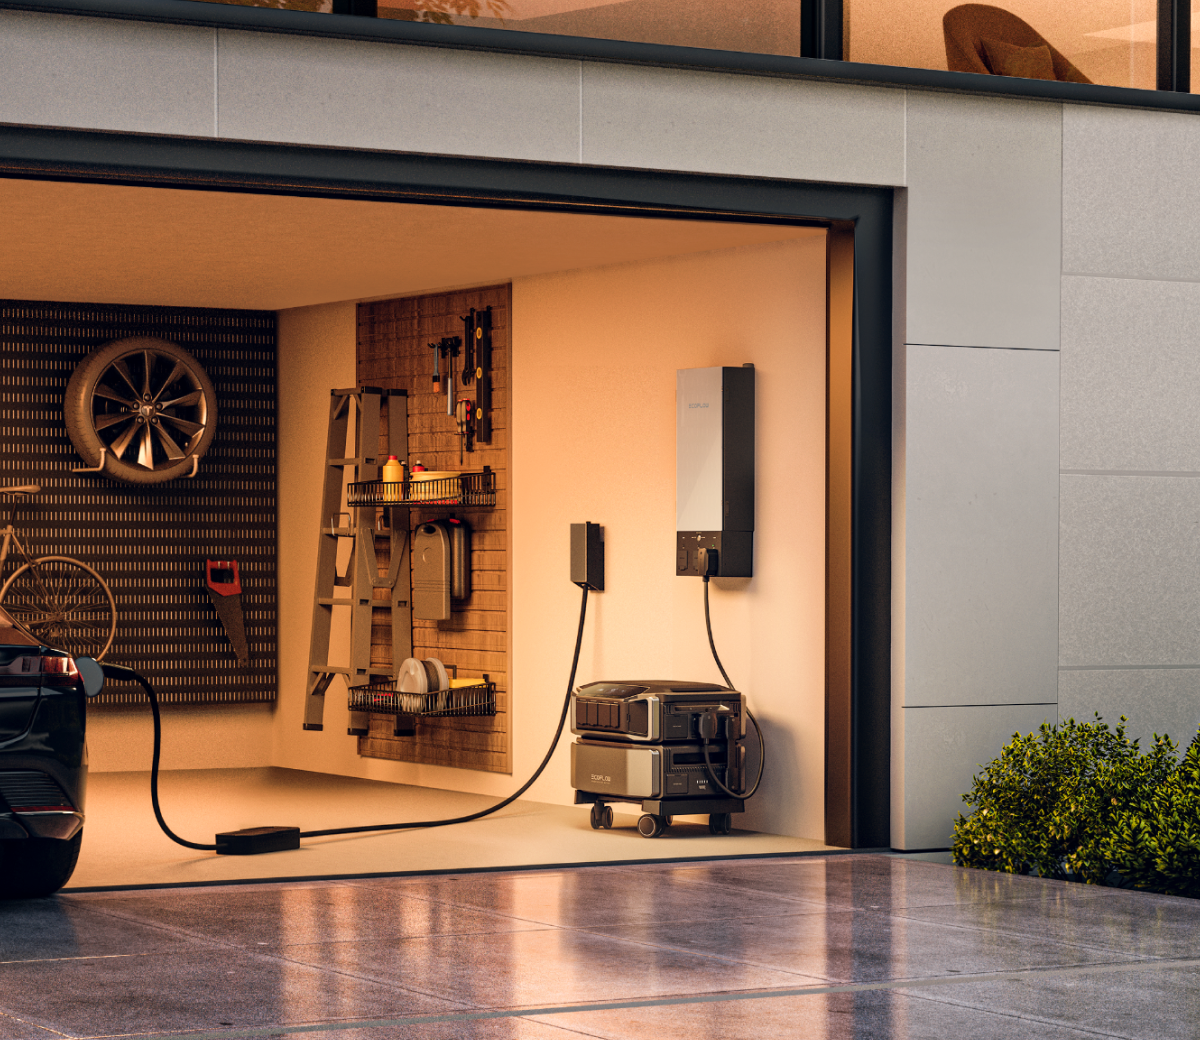 EcoFlow DELTA Pro Ultra home generator is plugged into a garage-wall-mounted Smart Home Panel 2, while a vehicle is connected to an EV charger.